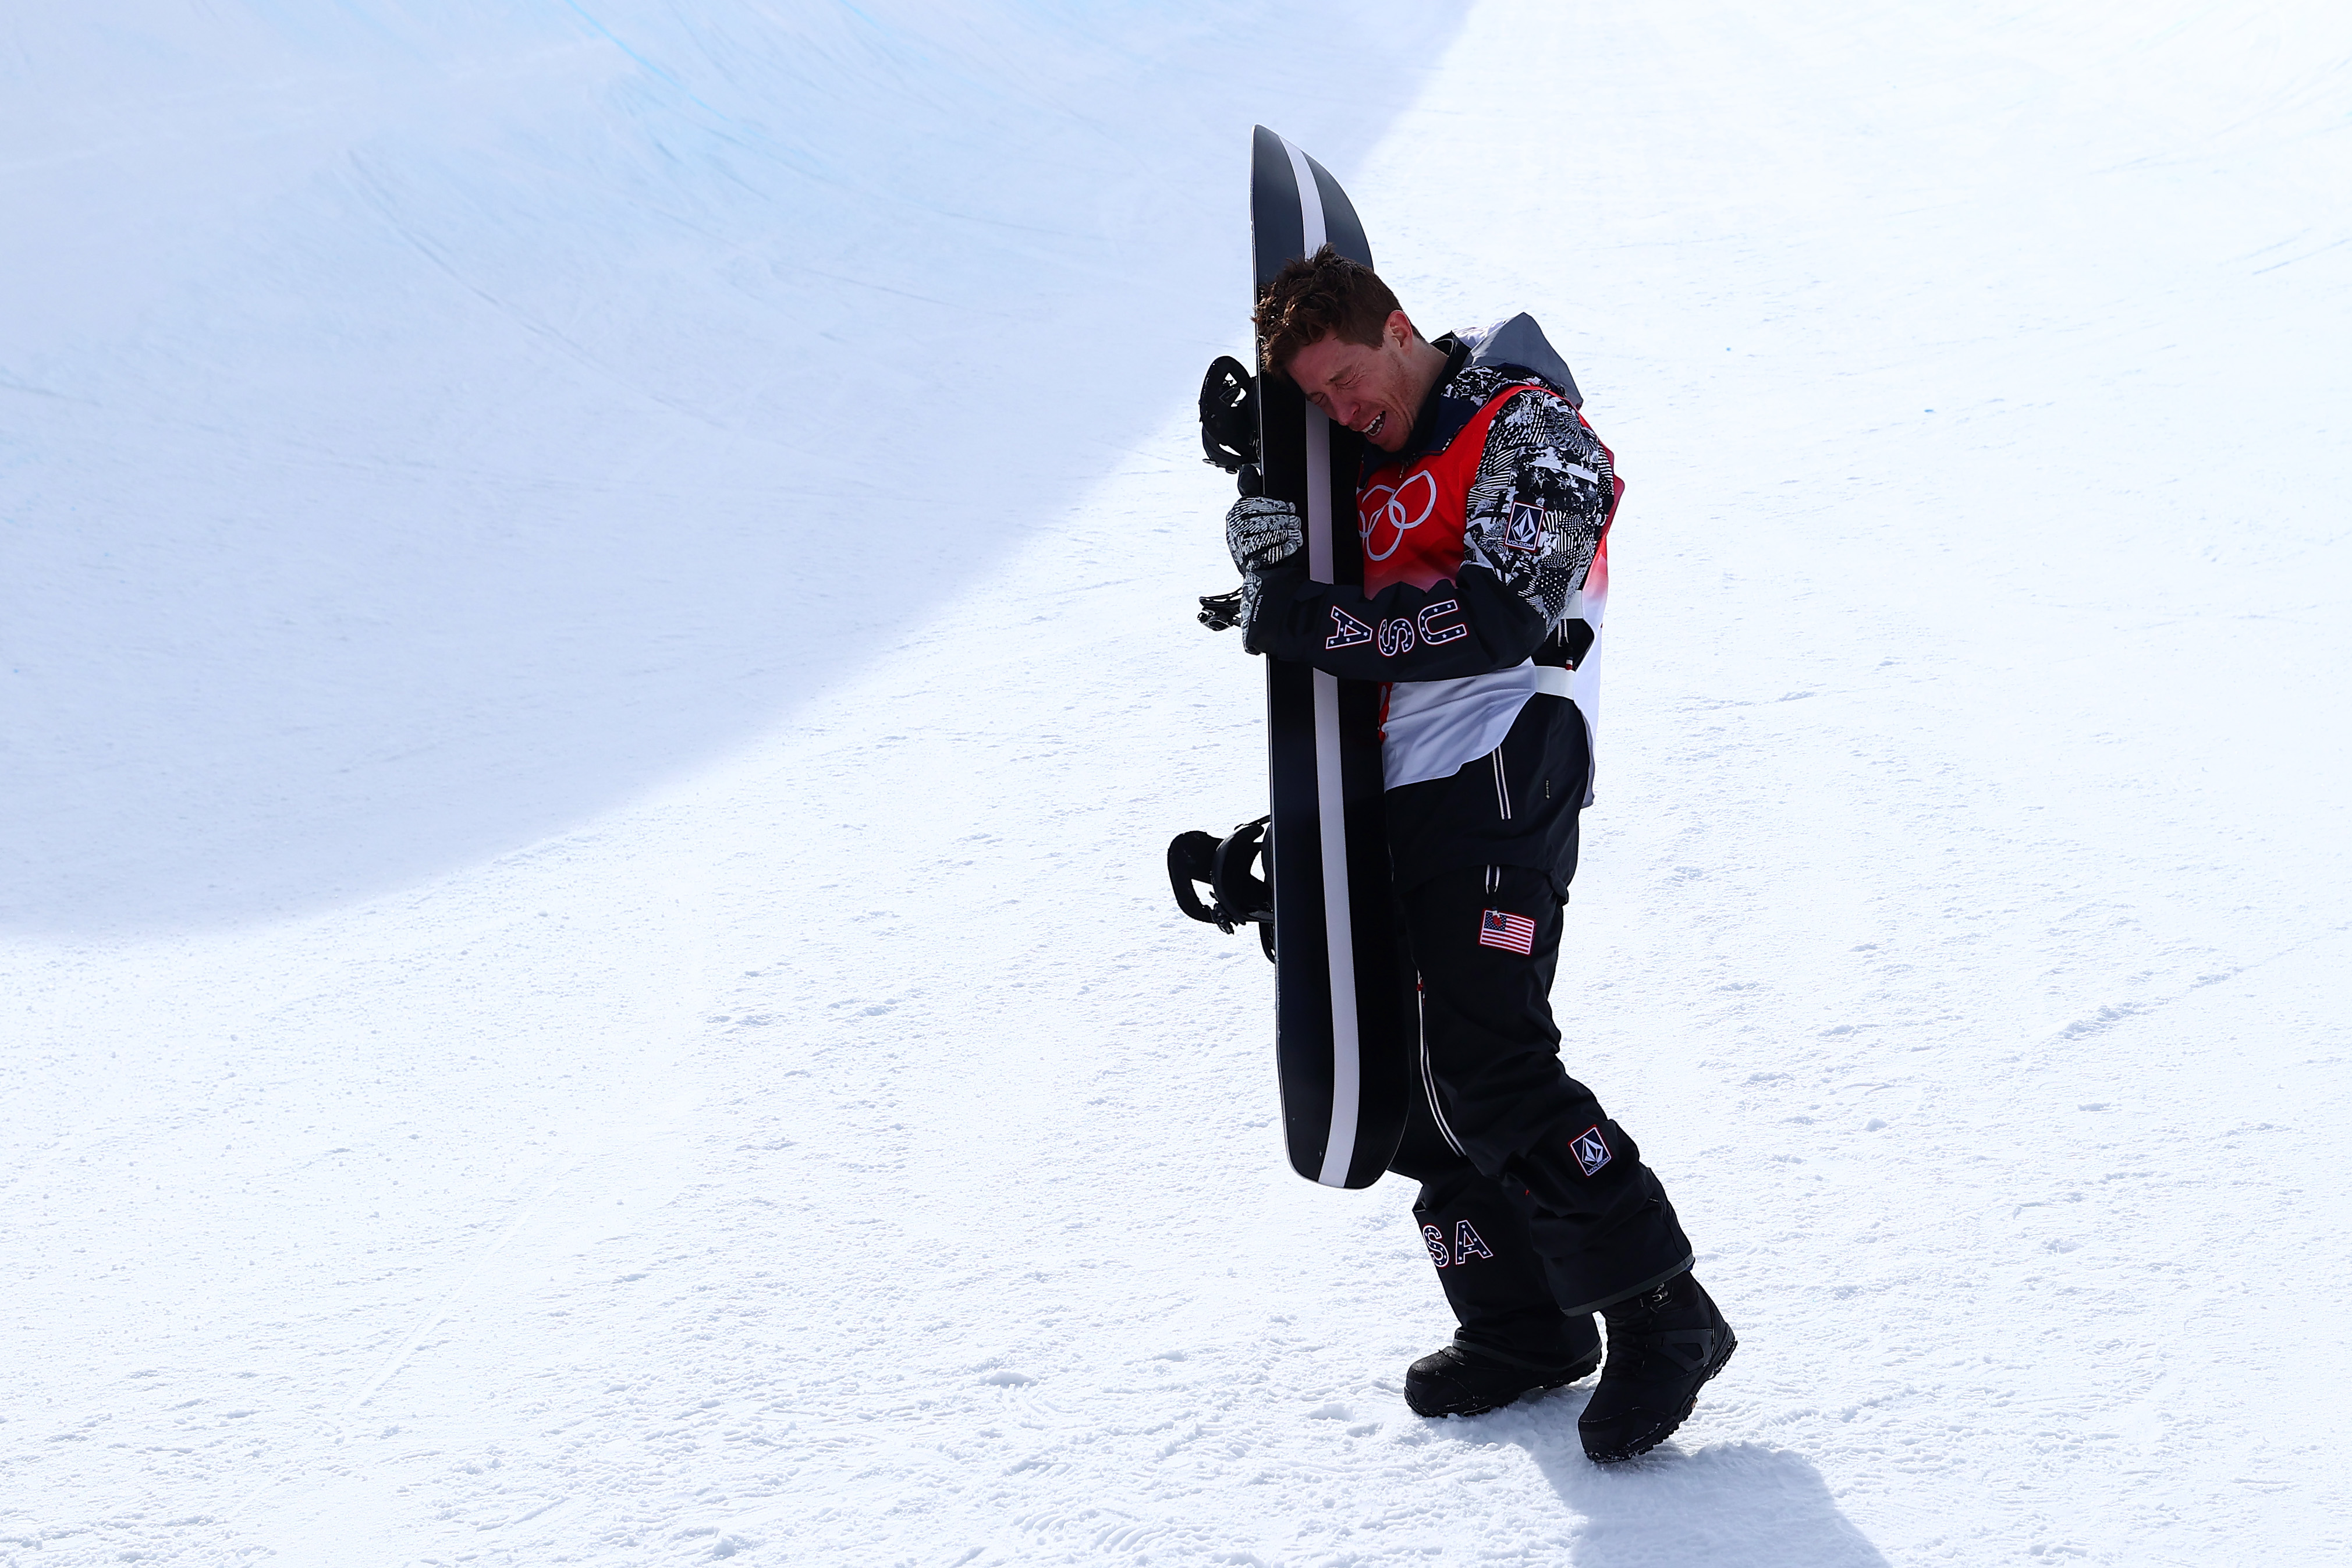 Shaun White 'Can't Wait' to Start New Chapter With Nina Dobrev